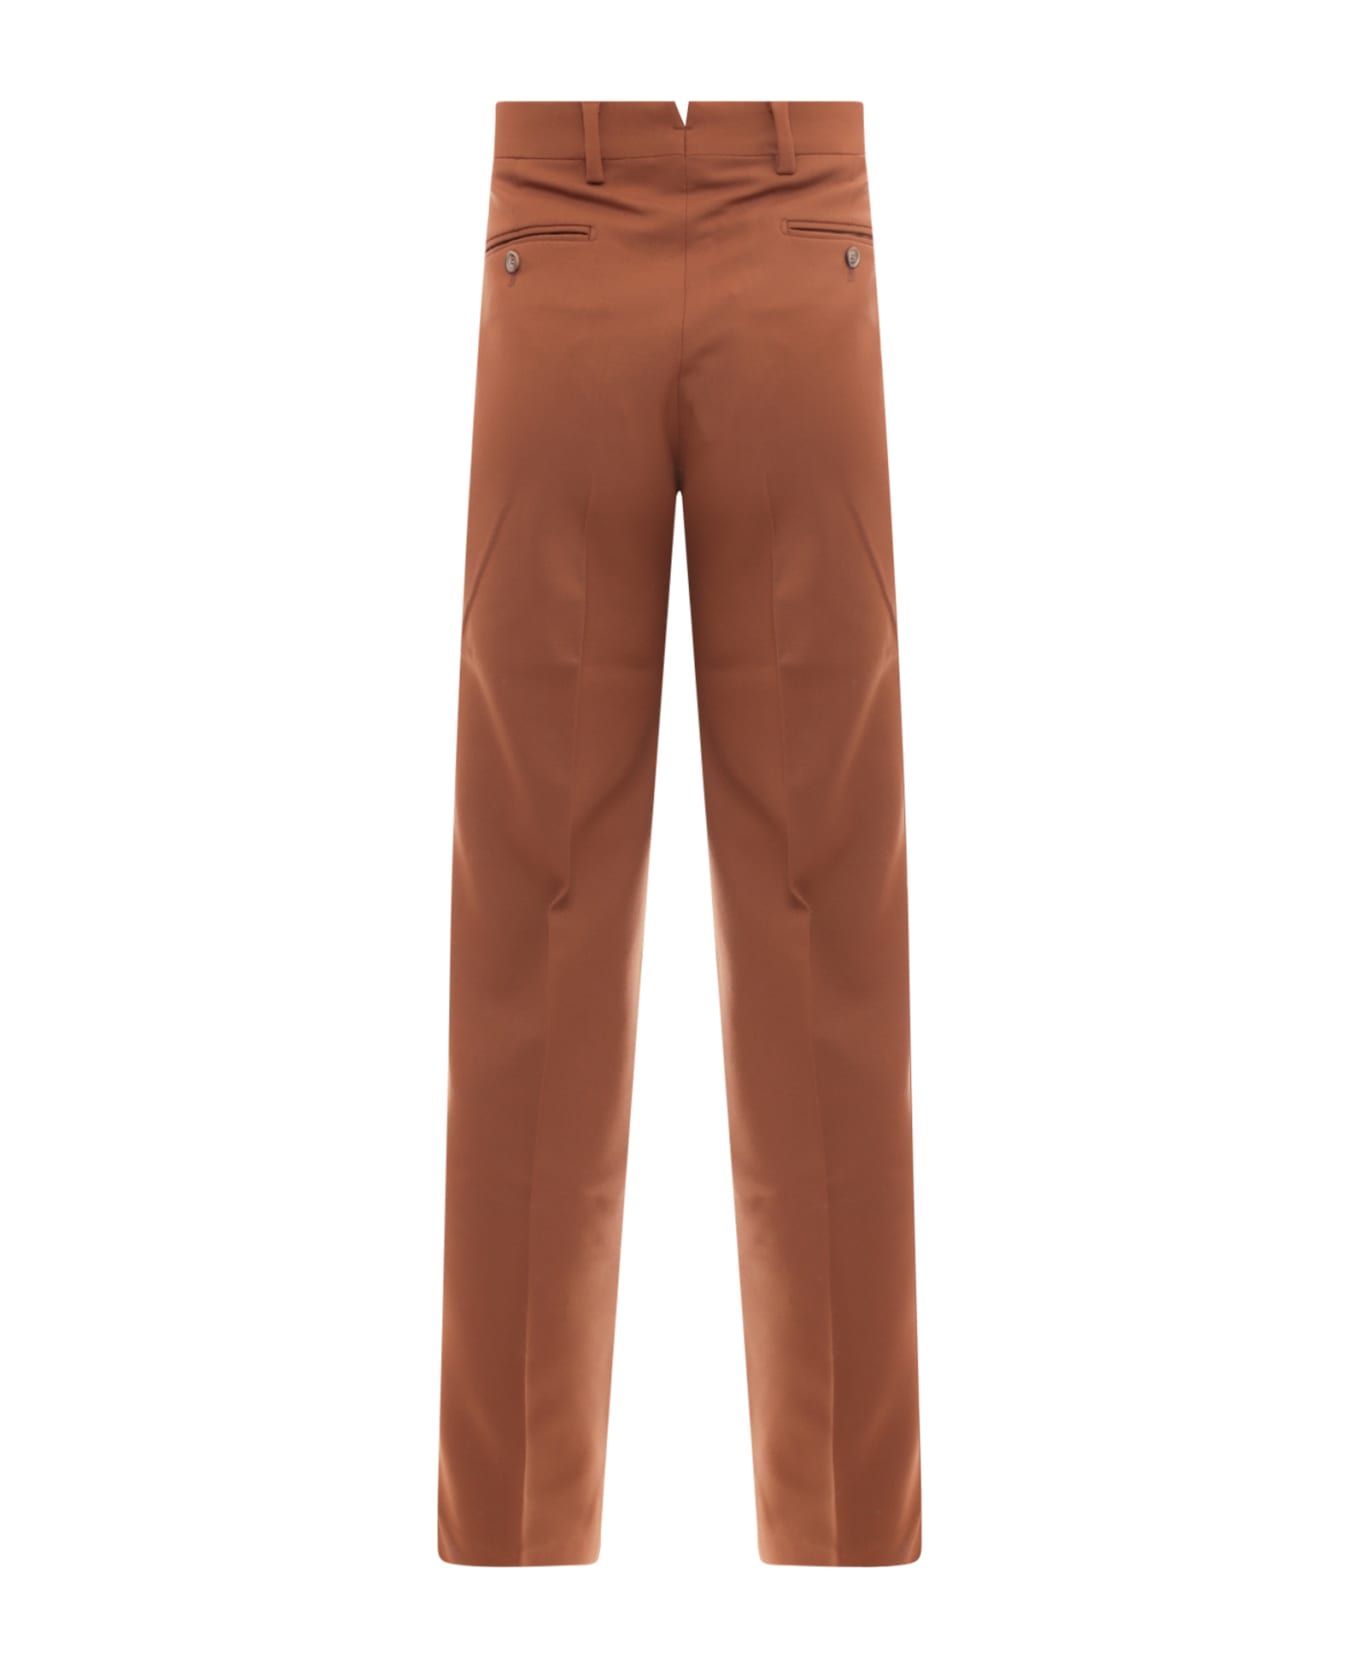 VTMNTS Trouser - Brown